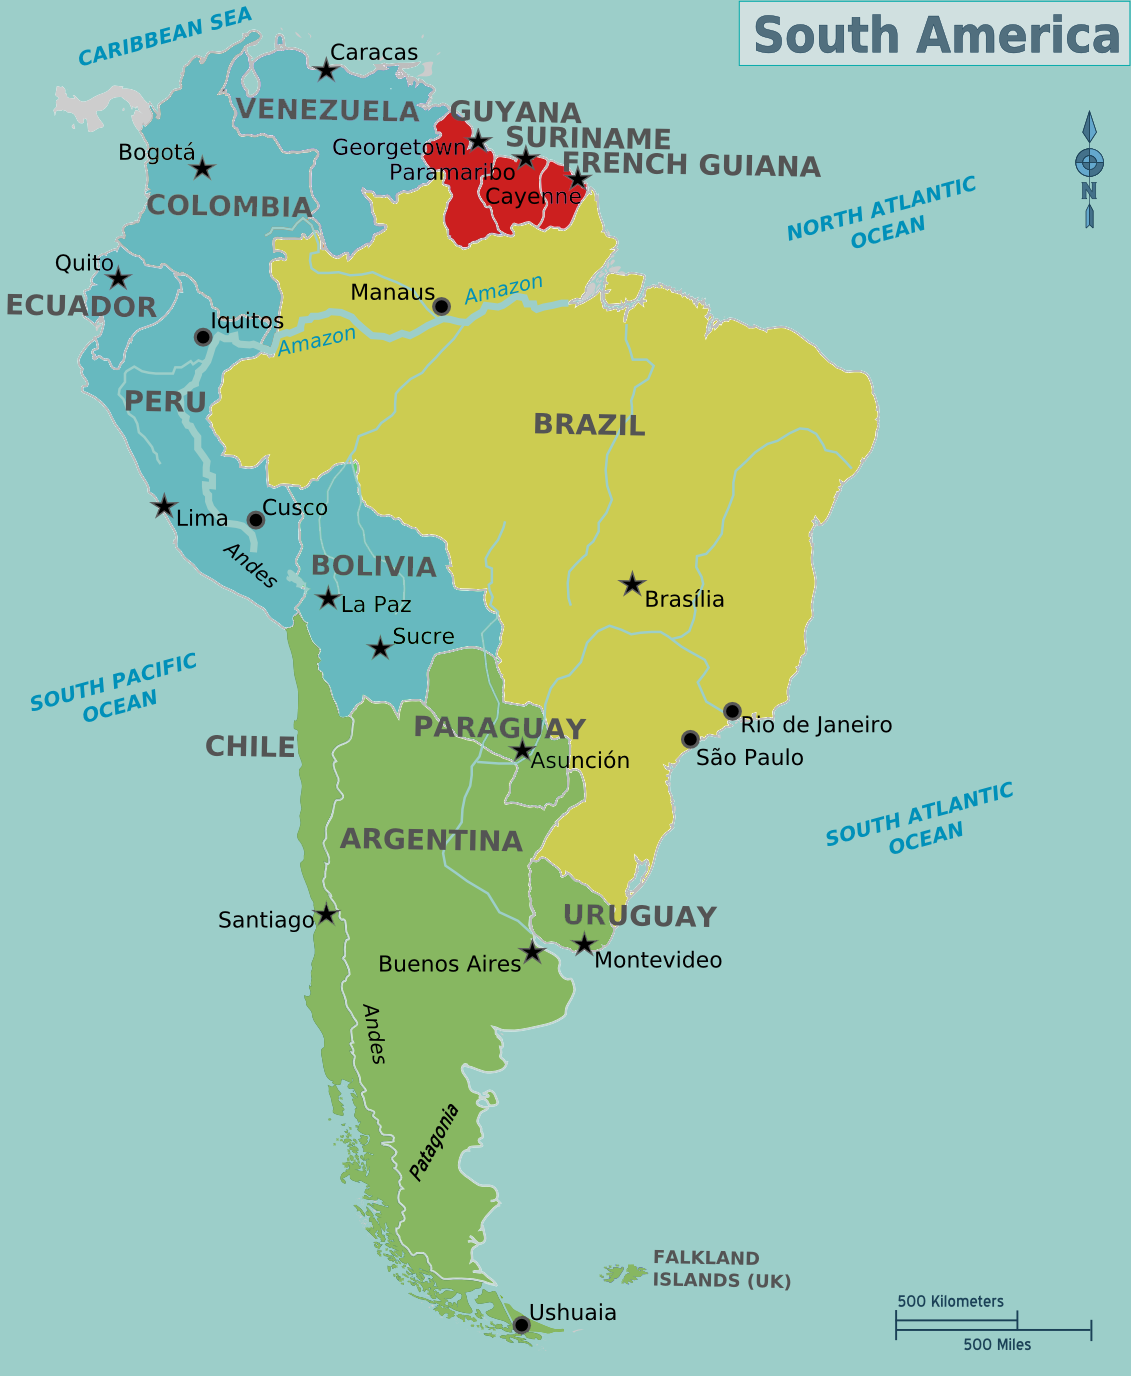 File:South America Color-coded Regions.png